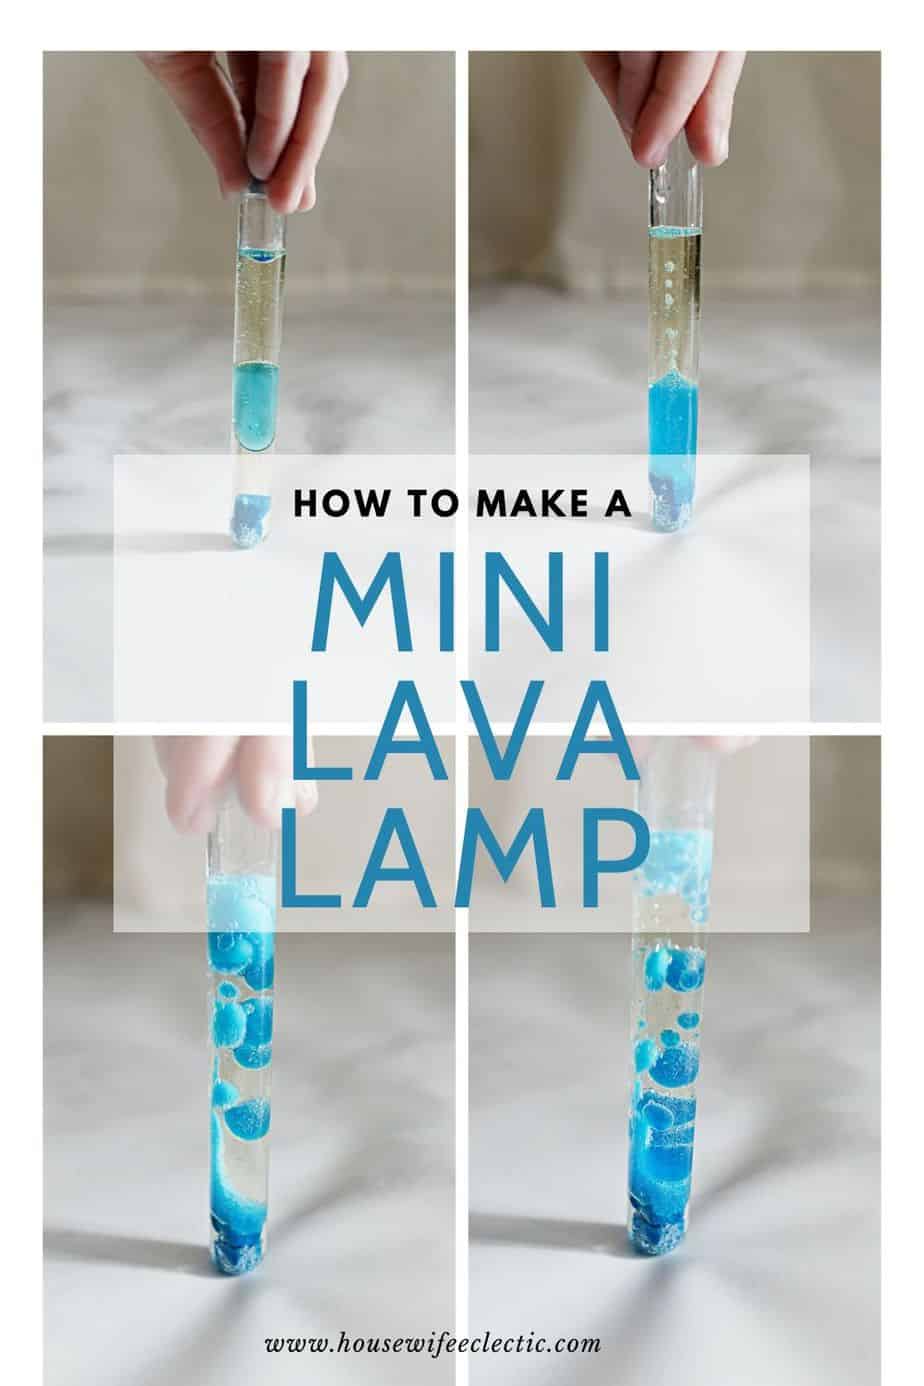 Housewife Eclectic: How to Make a Mini Lava Lamp